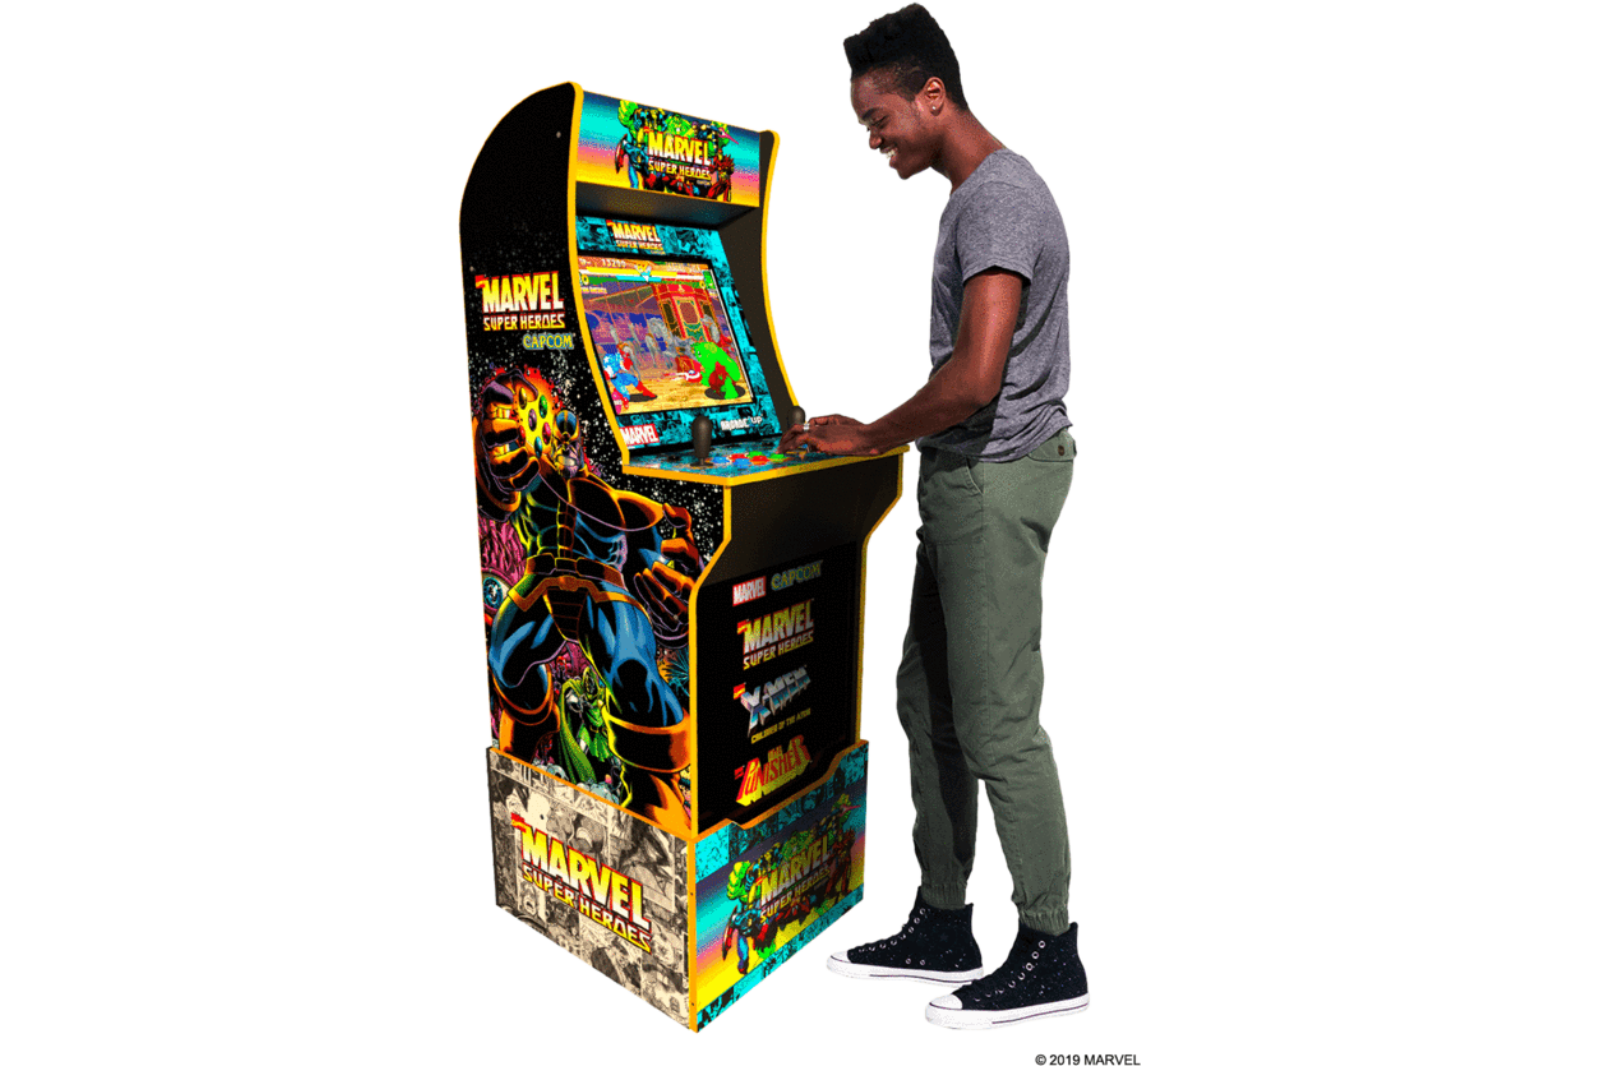 Arcade1up Games Cabinets Head To The Uk image 2